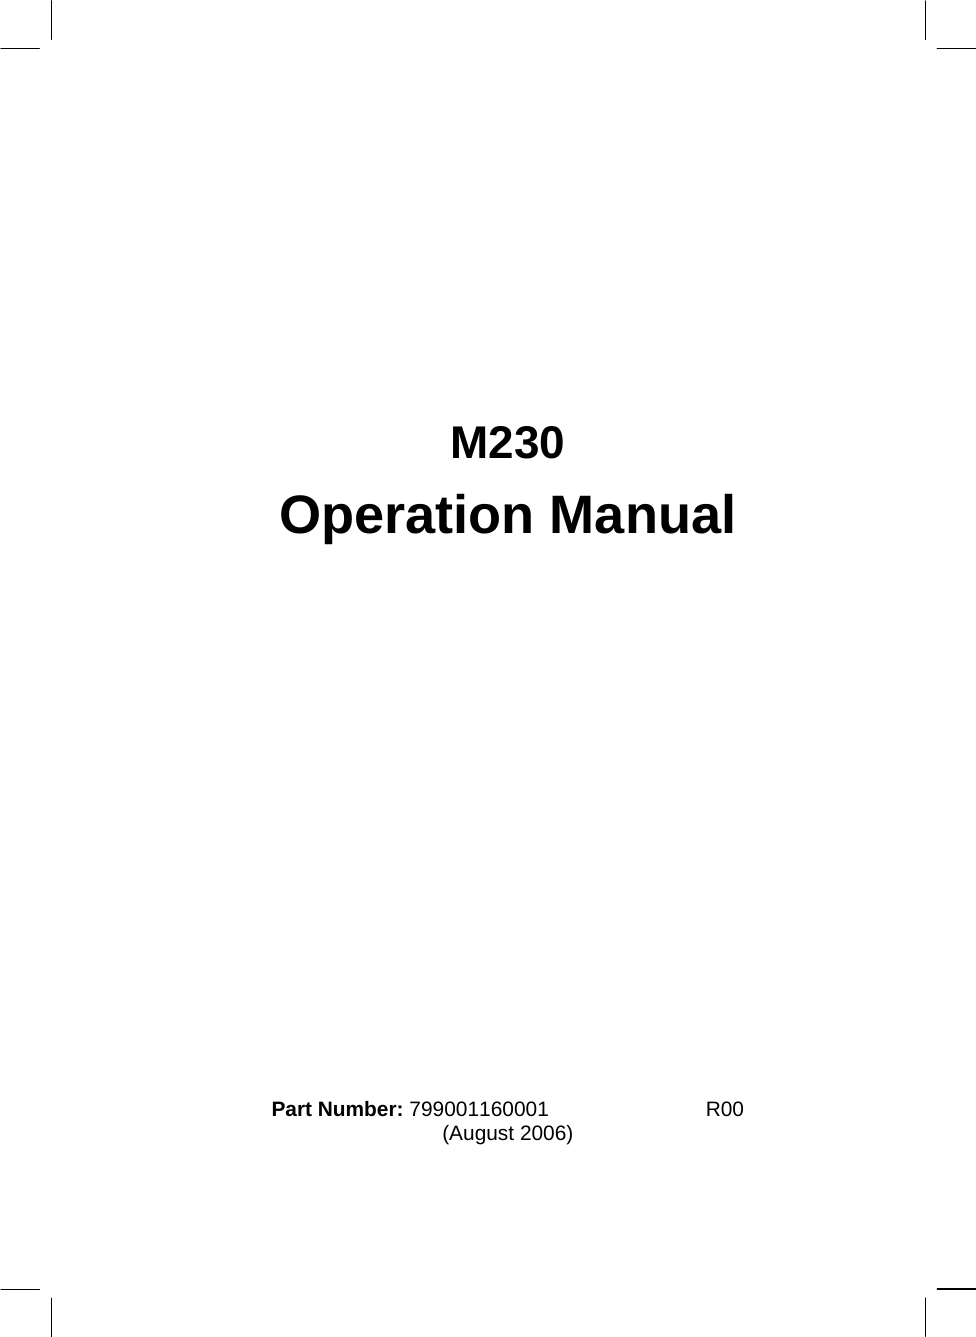         M230 Operation Manual              Part Number: 7990011600010000 0000 0001 R00 (August 2006)  